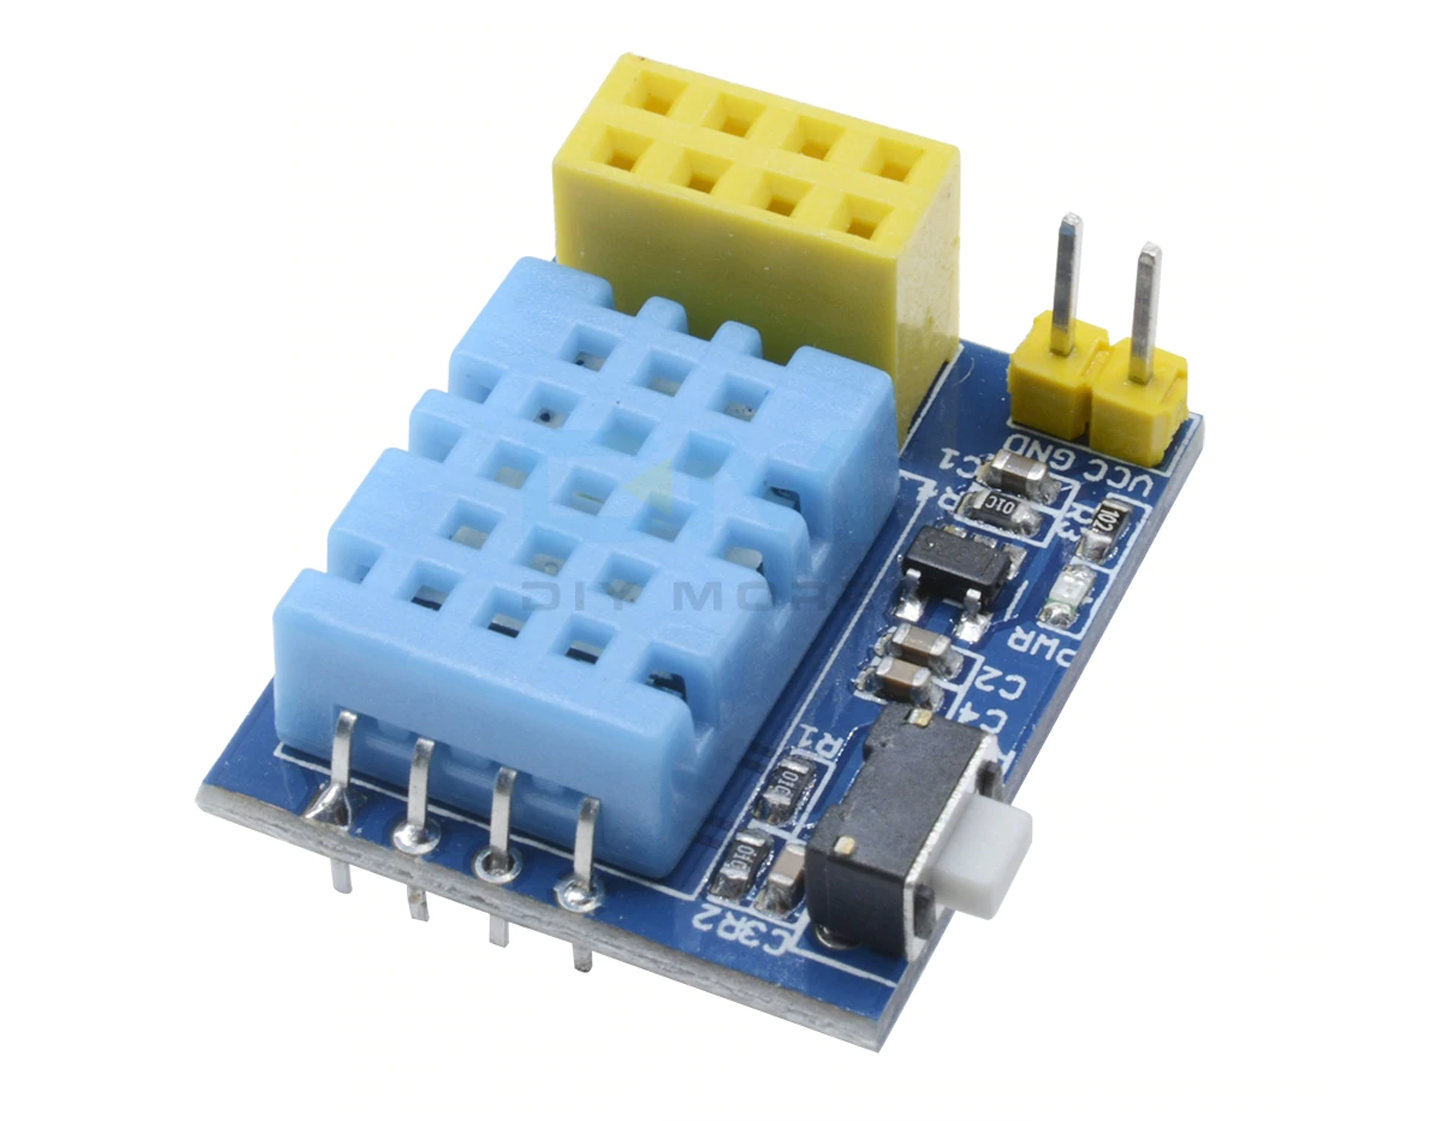 Product image of a DHT11 module board